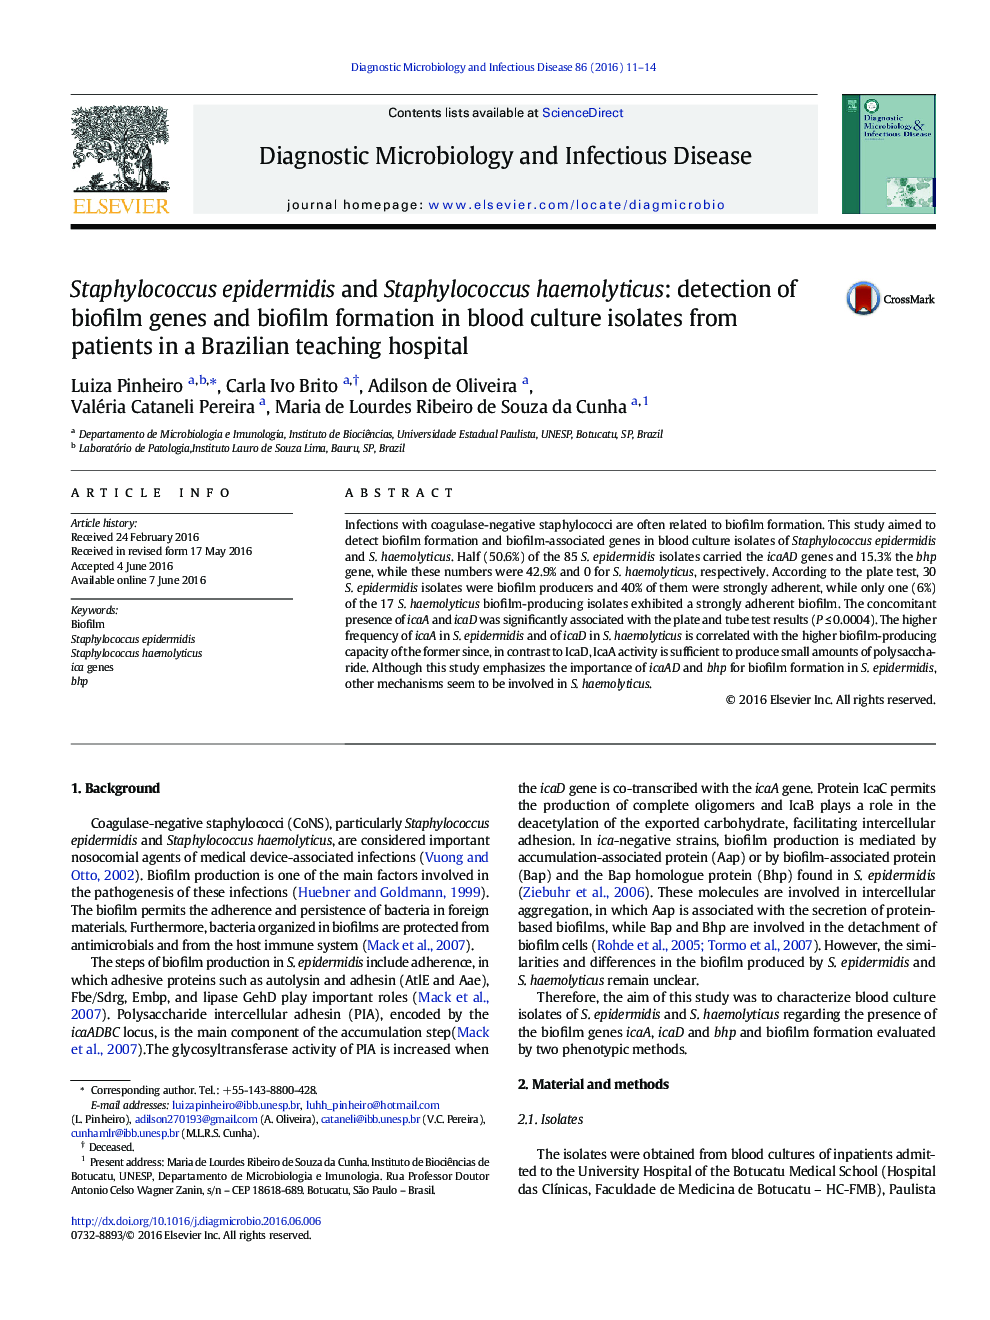 Staphylococcus epidermidis and Staphylococcus haemolyticus: detection of biofilm genes and biofilm formation in blood culture isolates from patients in a Brazilian teaching hospital